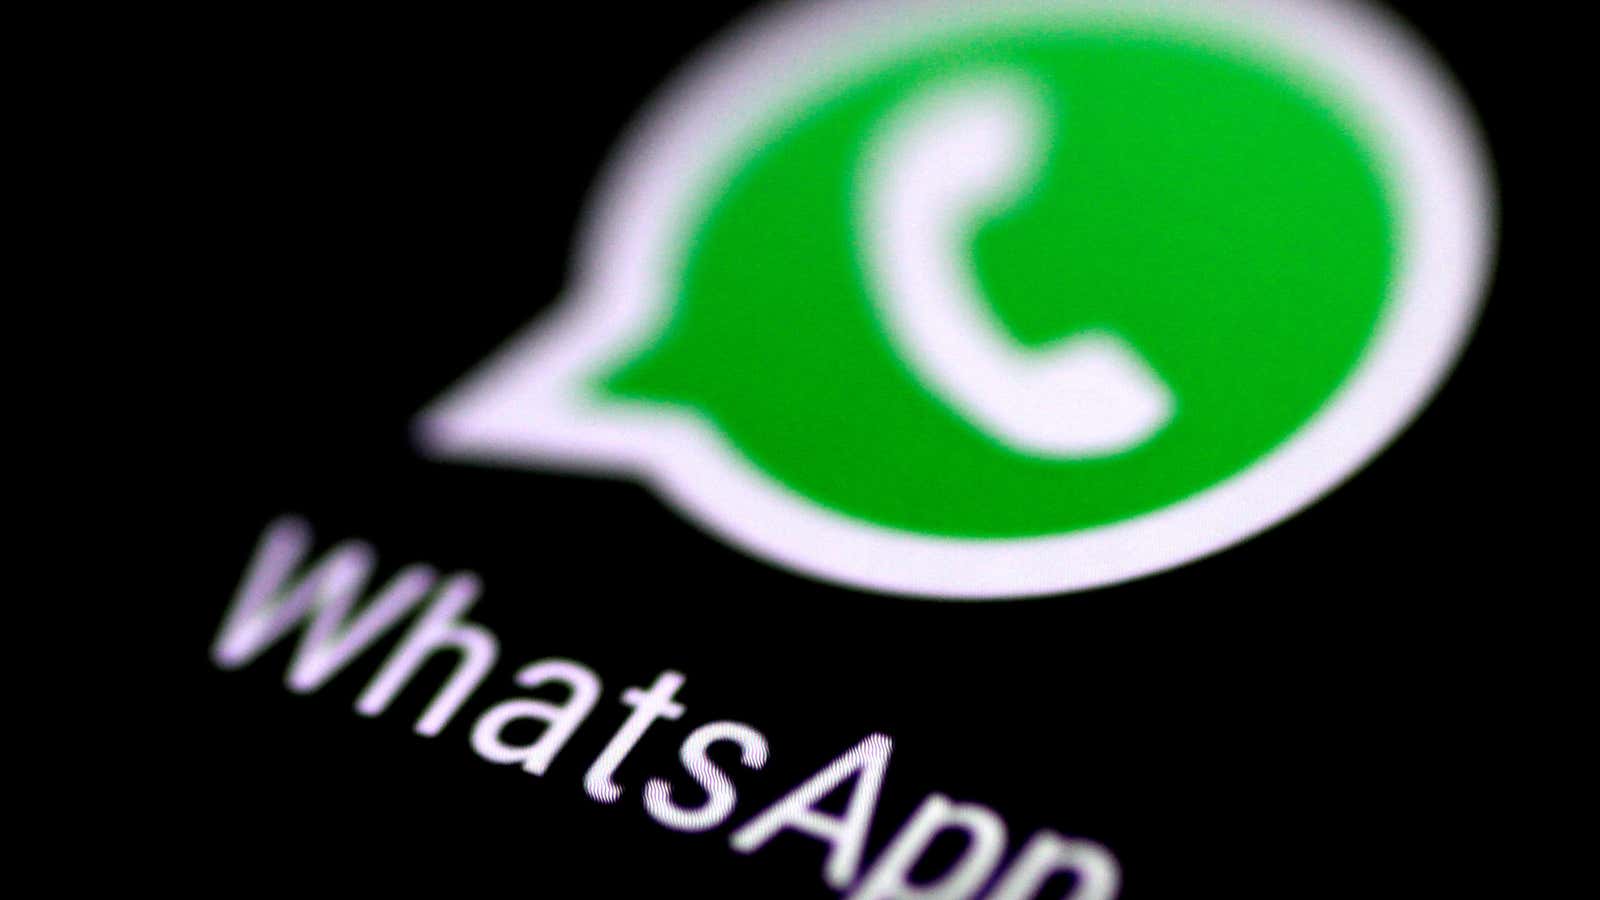 NSO Group WhatsApp hack victims speak out, from India to Rwanda